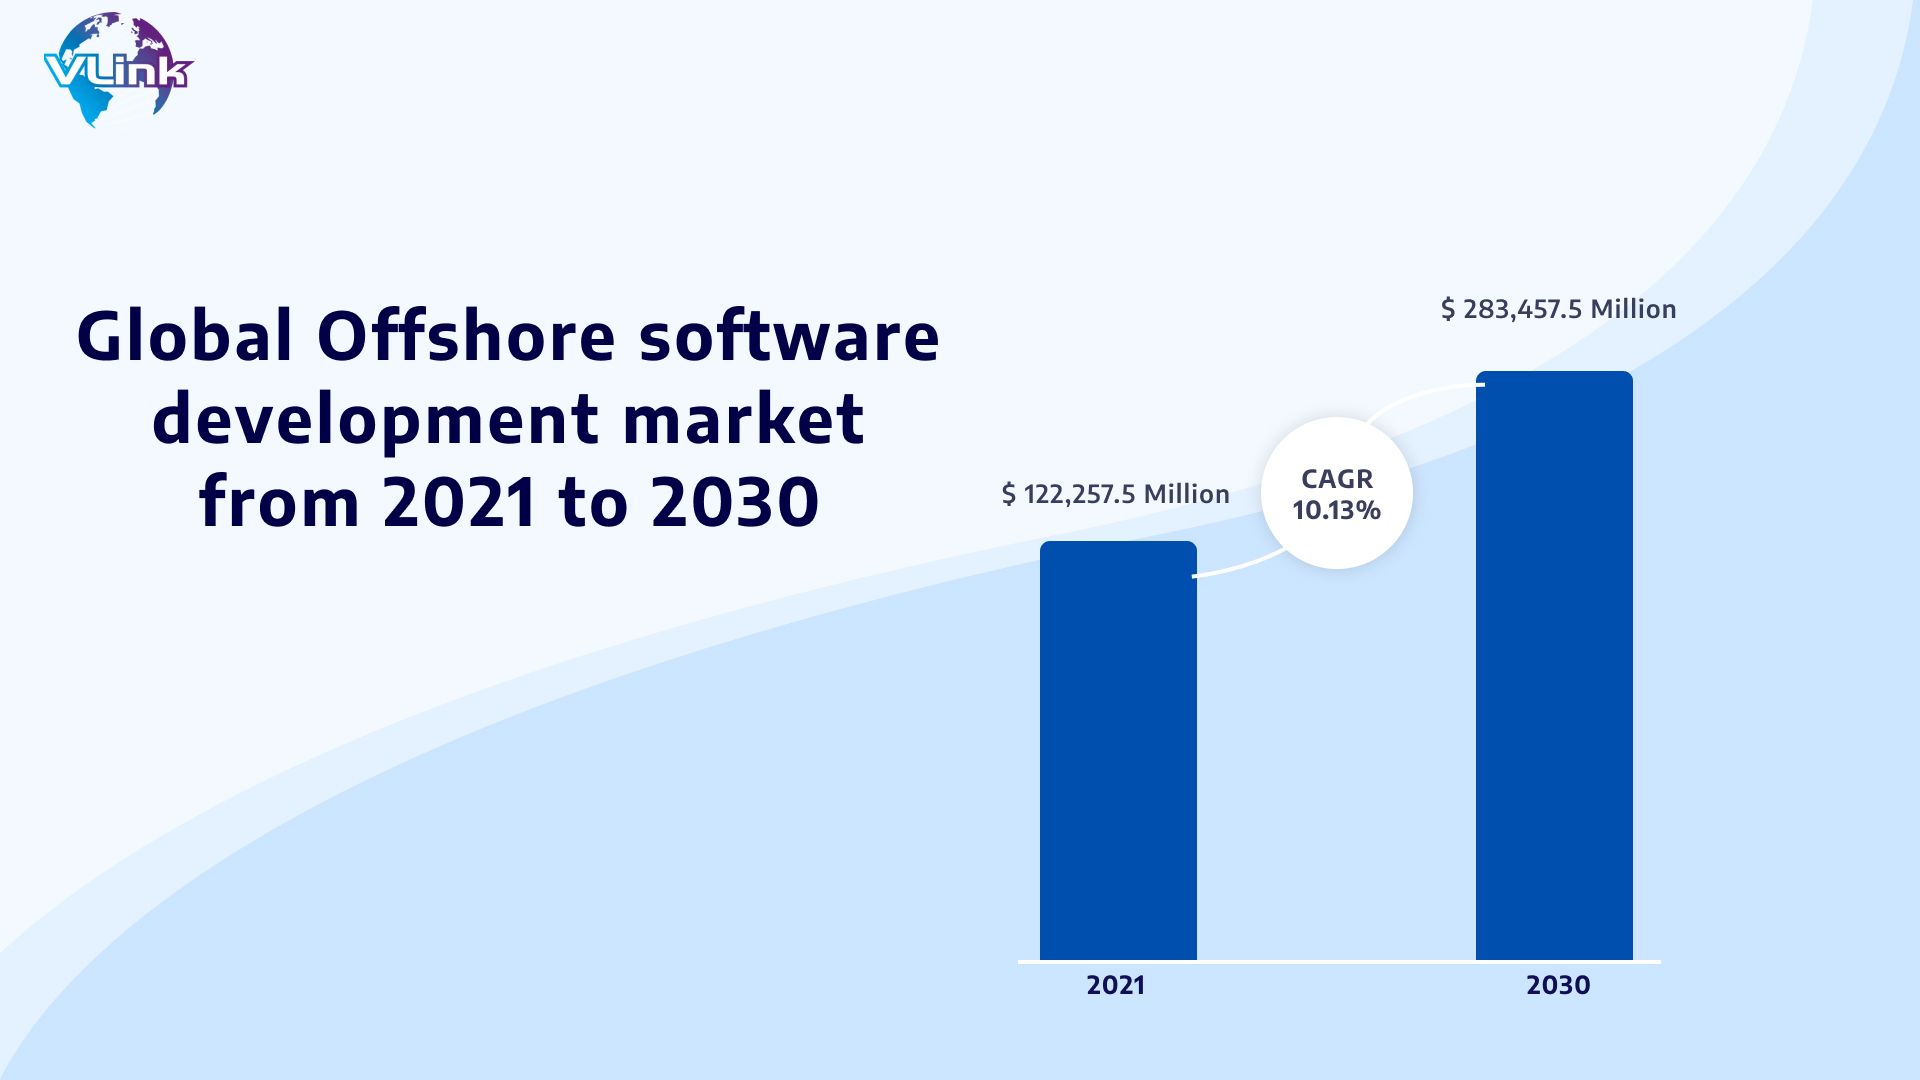 Global Offshore software development market from 2021 to 2030